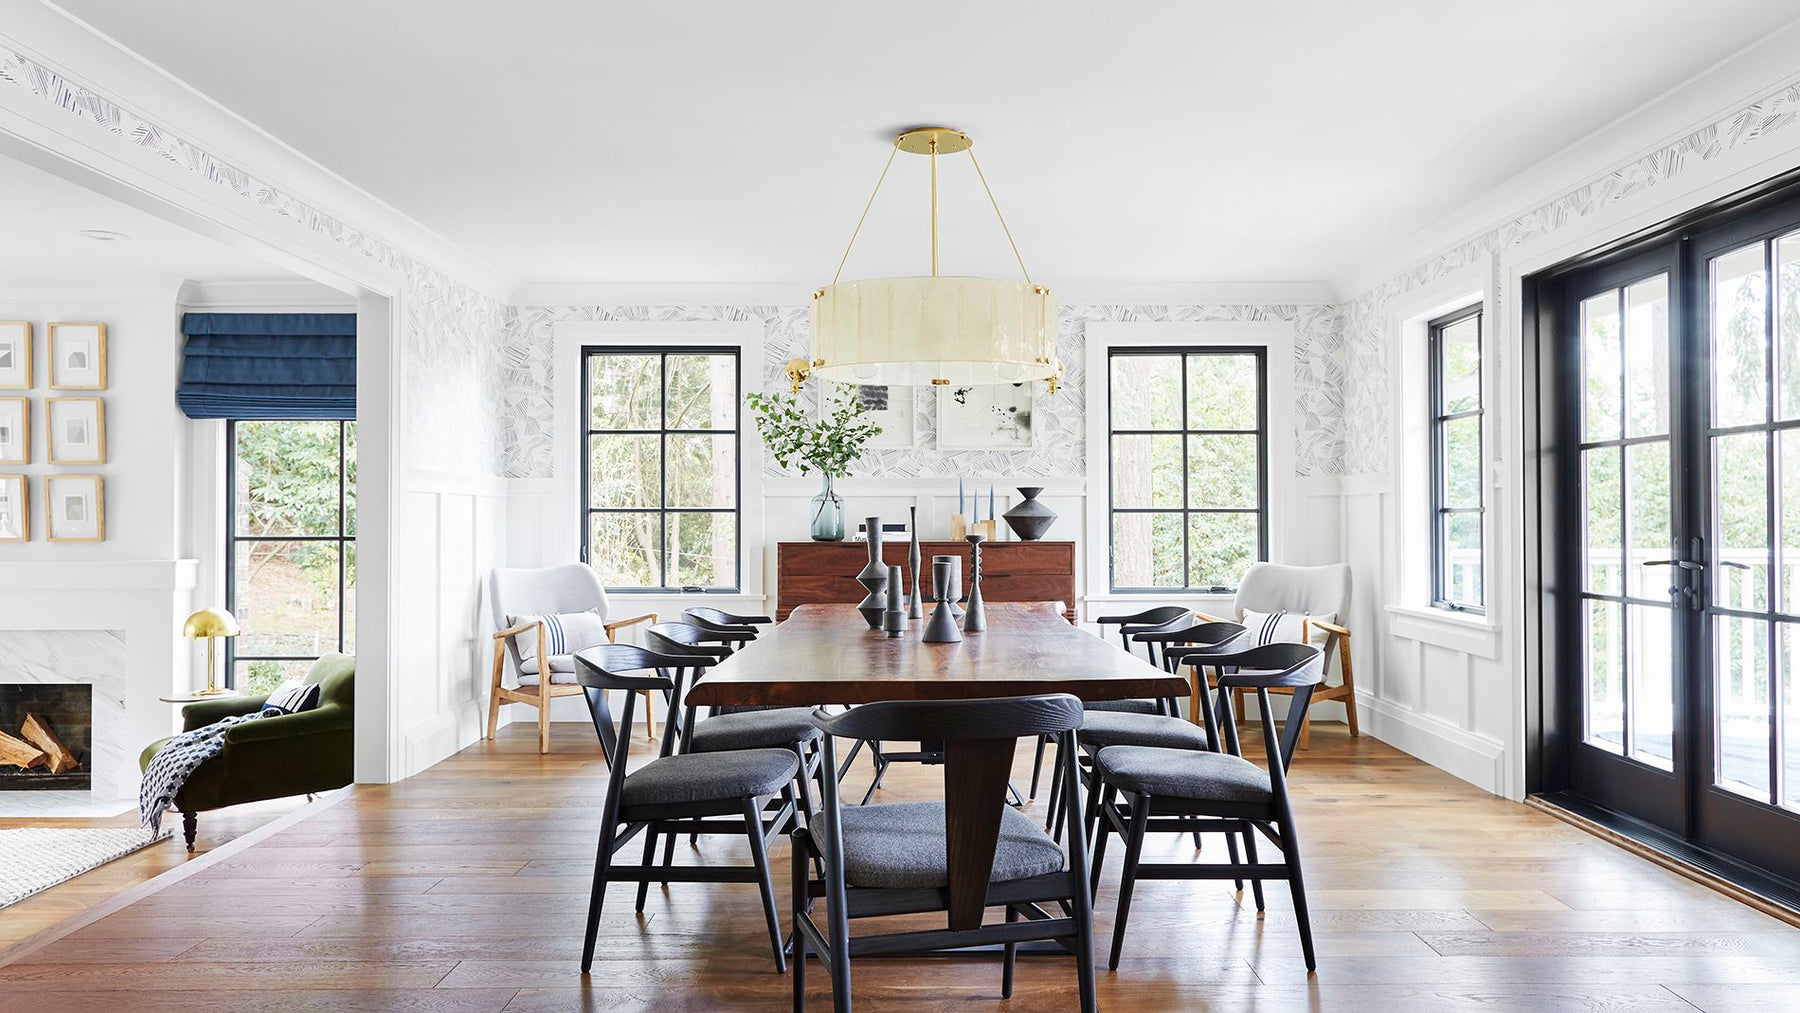 Find Your Perfect Dining Room Aesthetic